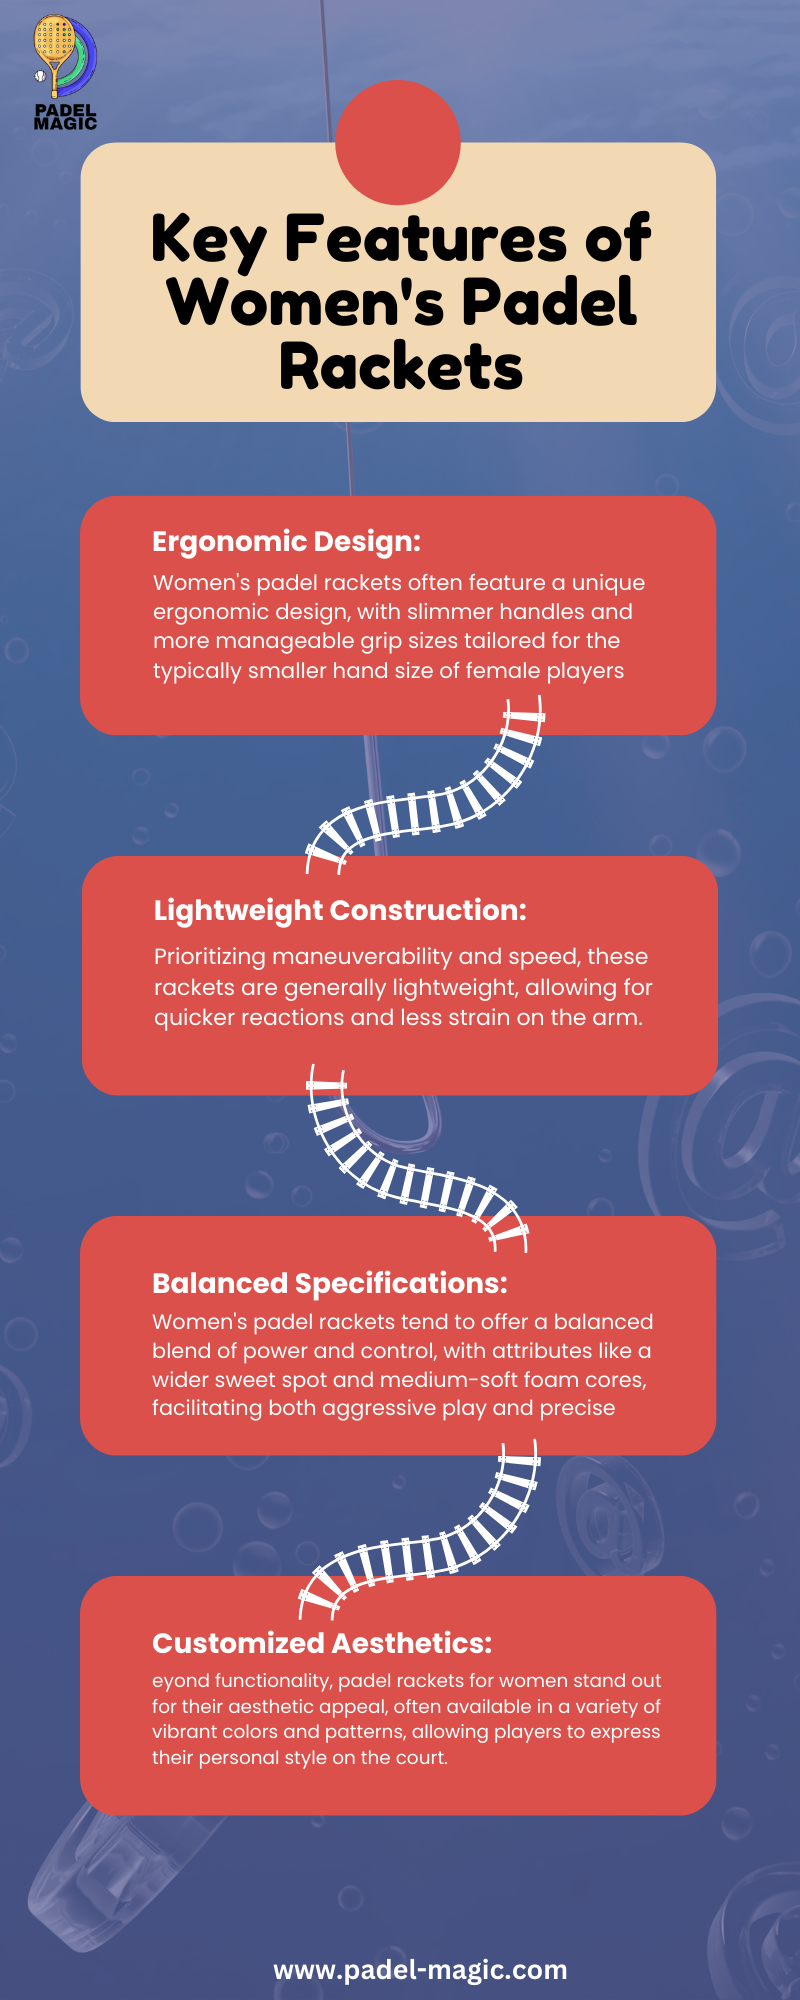 Key Features of Women's Padel Rackets infographic